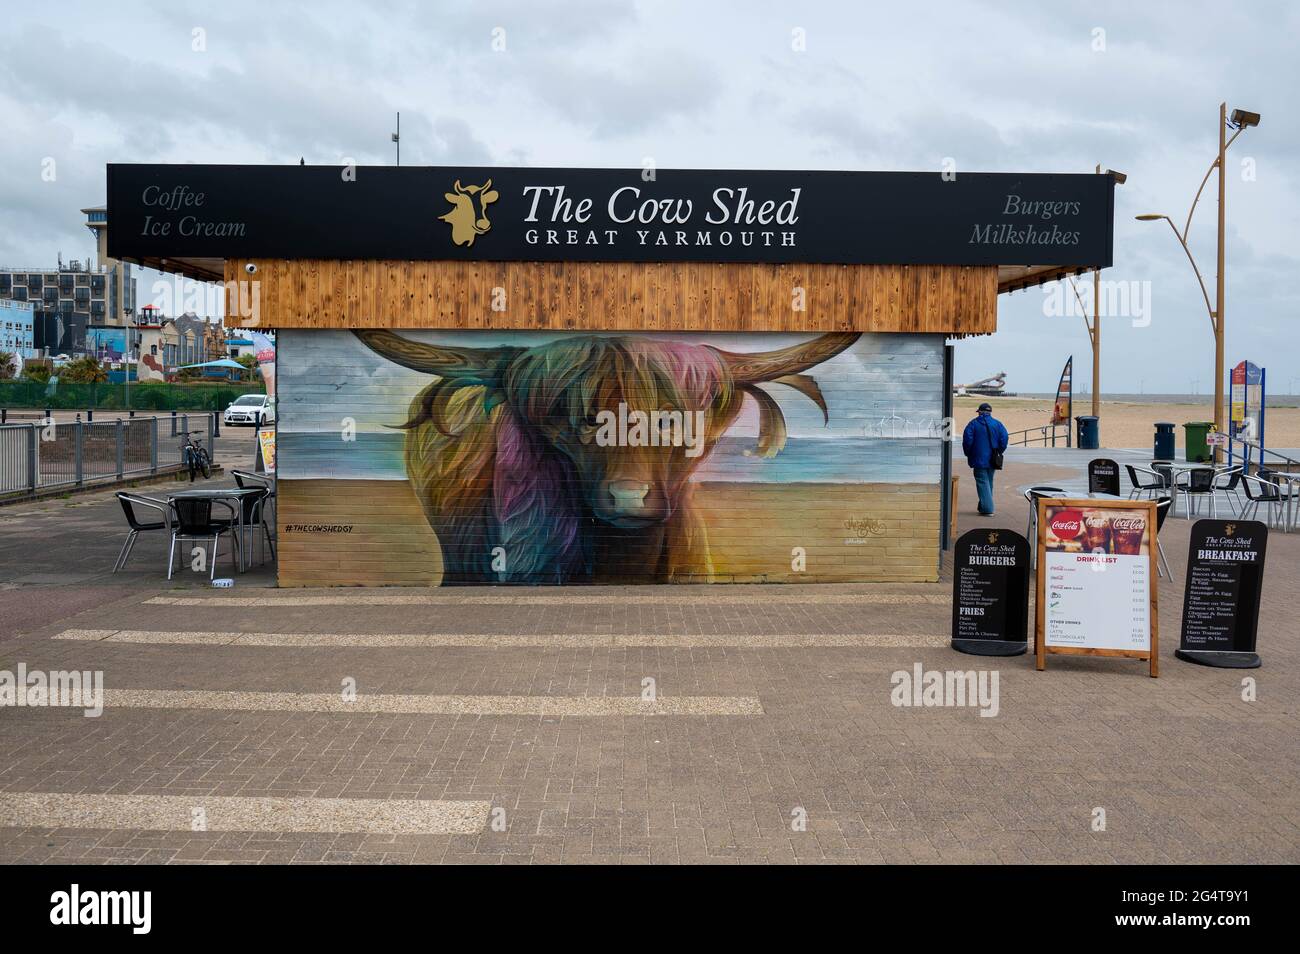 The Cow Shed restaurant and cafe on Great Yarmouth seafront Stock Photo